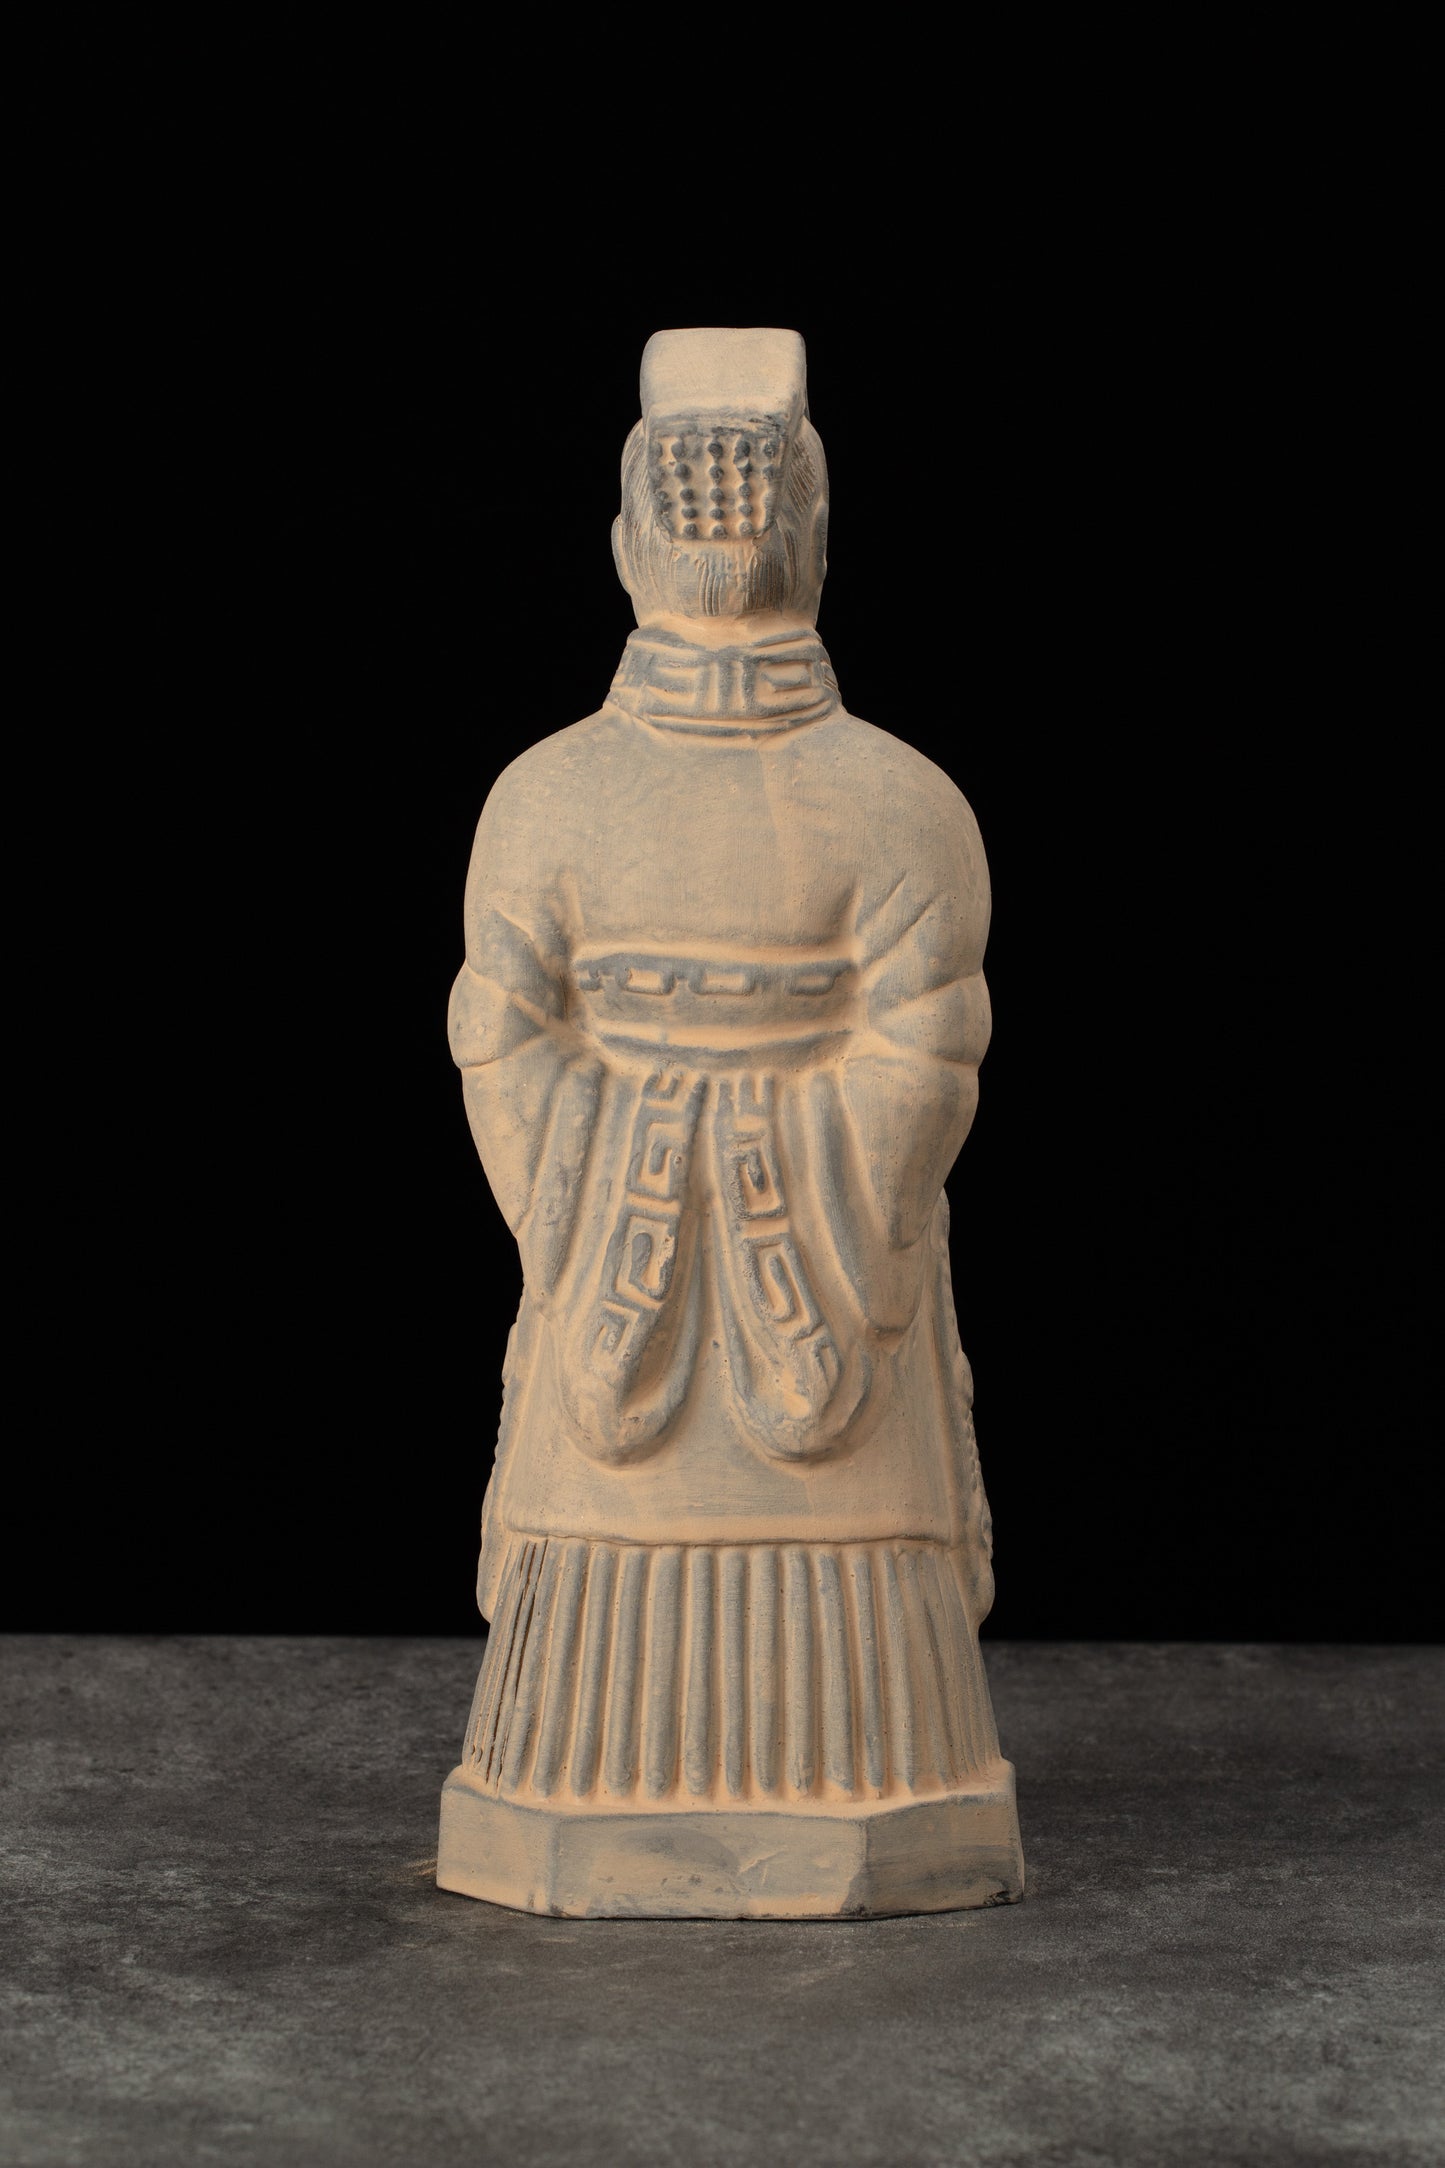 25CM Emperor - CLAYARMY -Midsize representation of Clayarmy's 25CM Emperor Qin Terracotta Warrior, a blend of historical significance and exquisite craftsmanship.